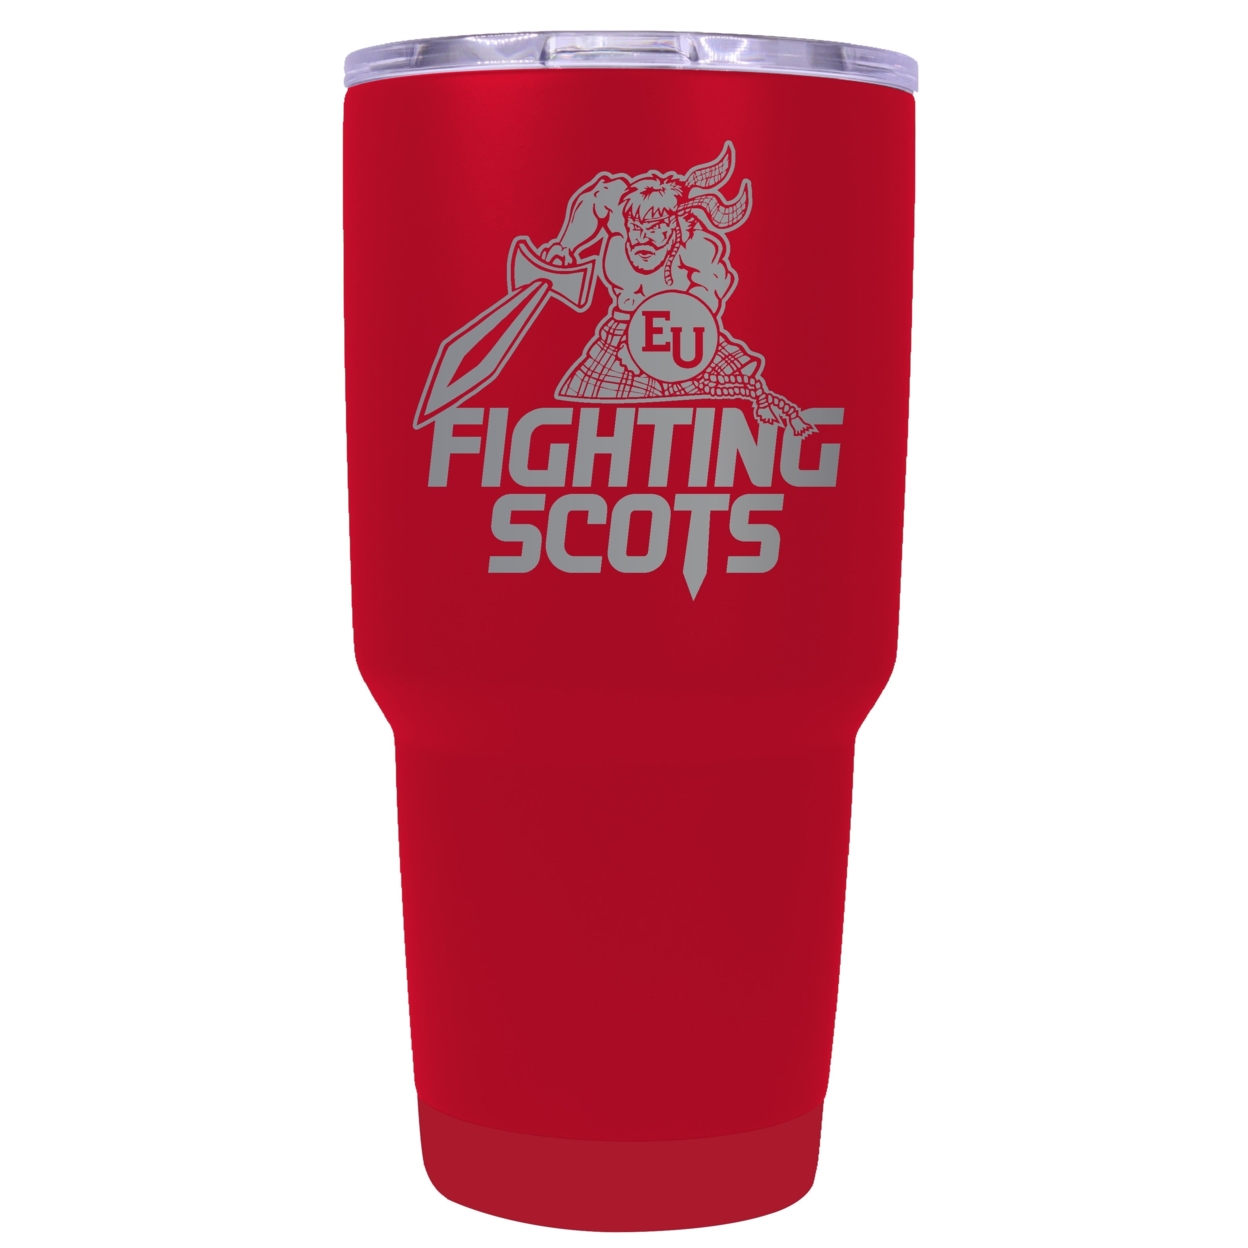 Edinboro University 24 Oz Laser Engraved Stainless Steel Insulated Tumbler - Choose Your Color. - Red